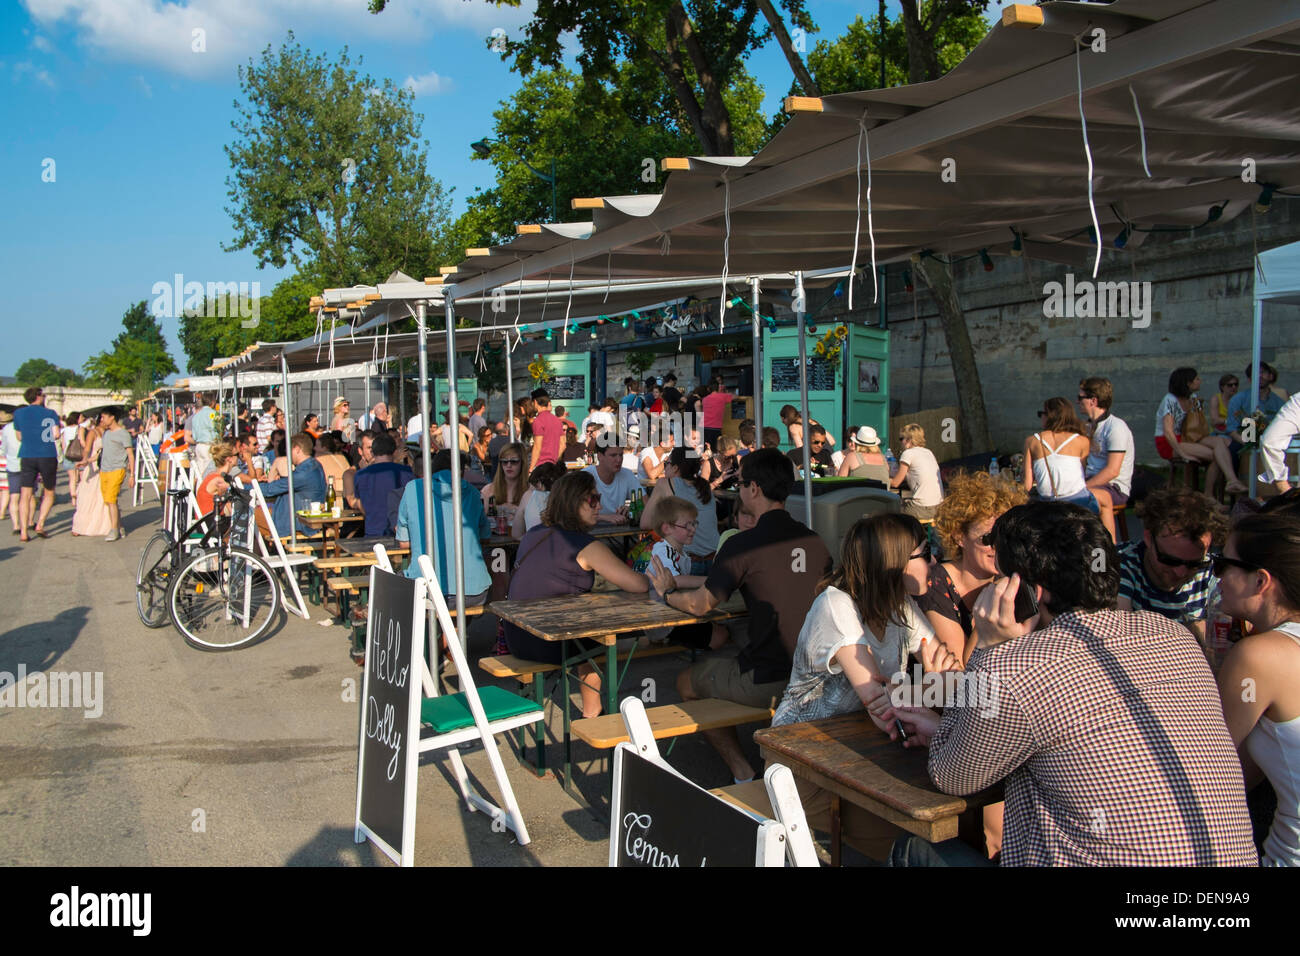 People relaxing at a cafe at Les Berges, along the Seine, Paris, France Stock Photo